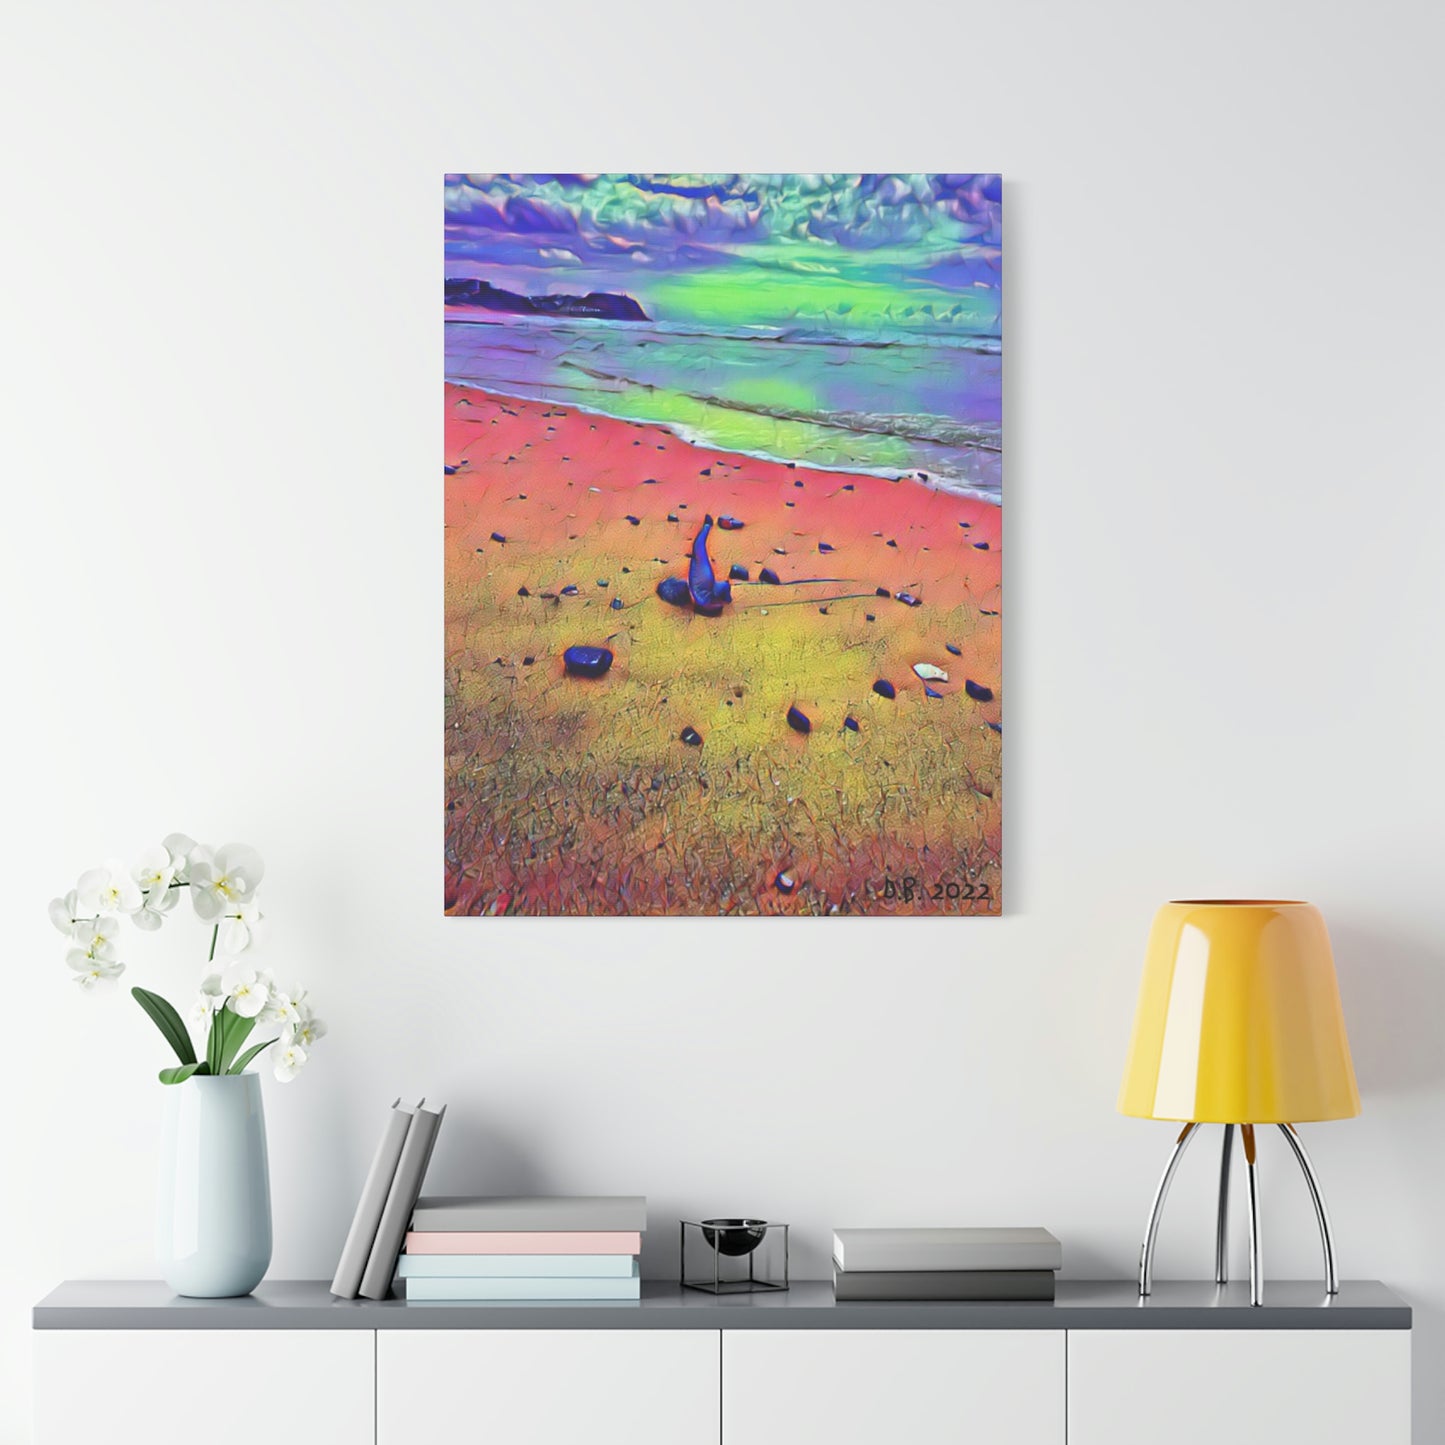 Stranded at Merewether Beach by D.B. Printed on Classic Canvas